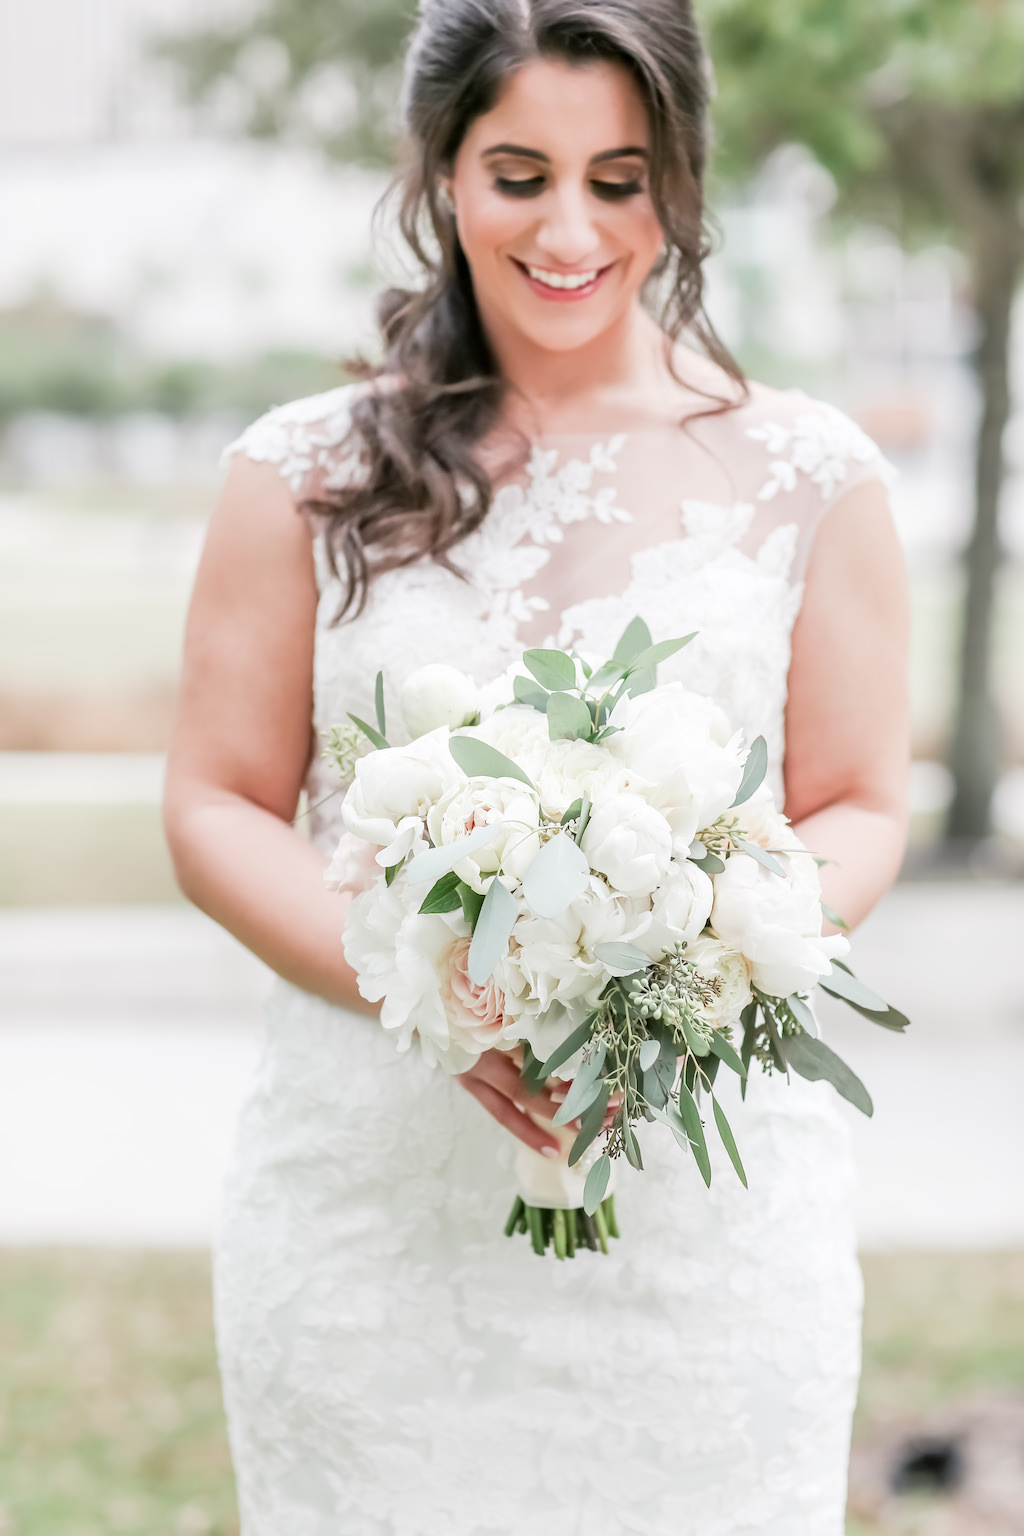 Florida Bride Outdoor Wedding Portrait, Bride in Lace and Illusion High Neckline Cap Sleeve Fit and Flare Wedding Dress with White and Greenery Floral Bouquet | Tampa Bay Wedding Photographer Lifelong Photography Studios | Hair and Makeup Artist Femme Akoi